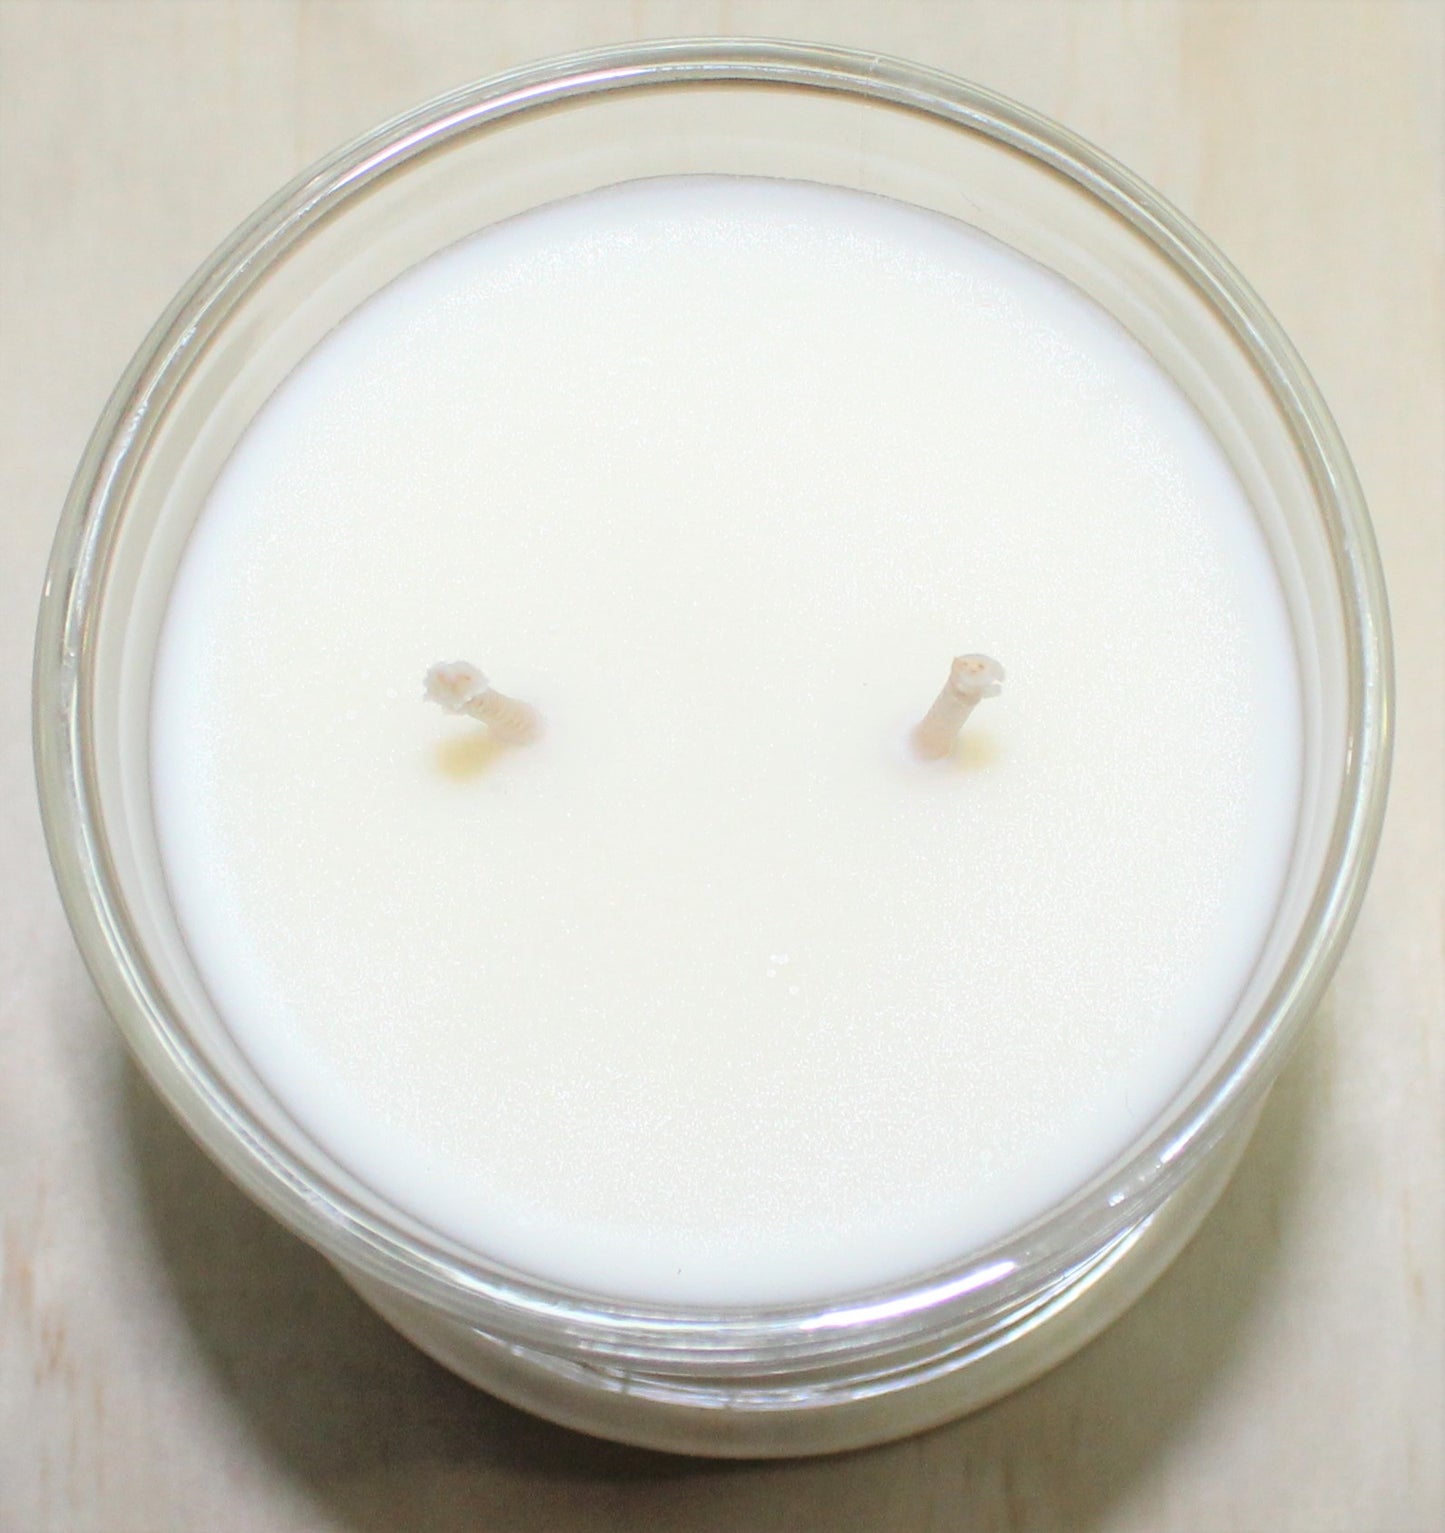 Vanilla Cove Soy Candle 50 hour Watermelon Fragrance in clear glass jar image shows 2 wicks